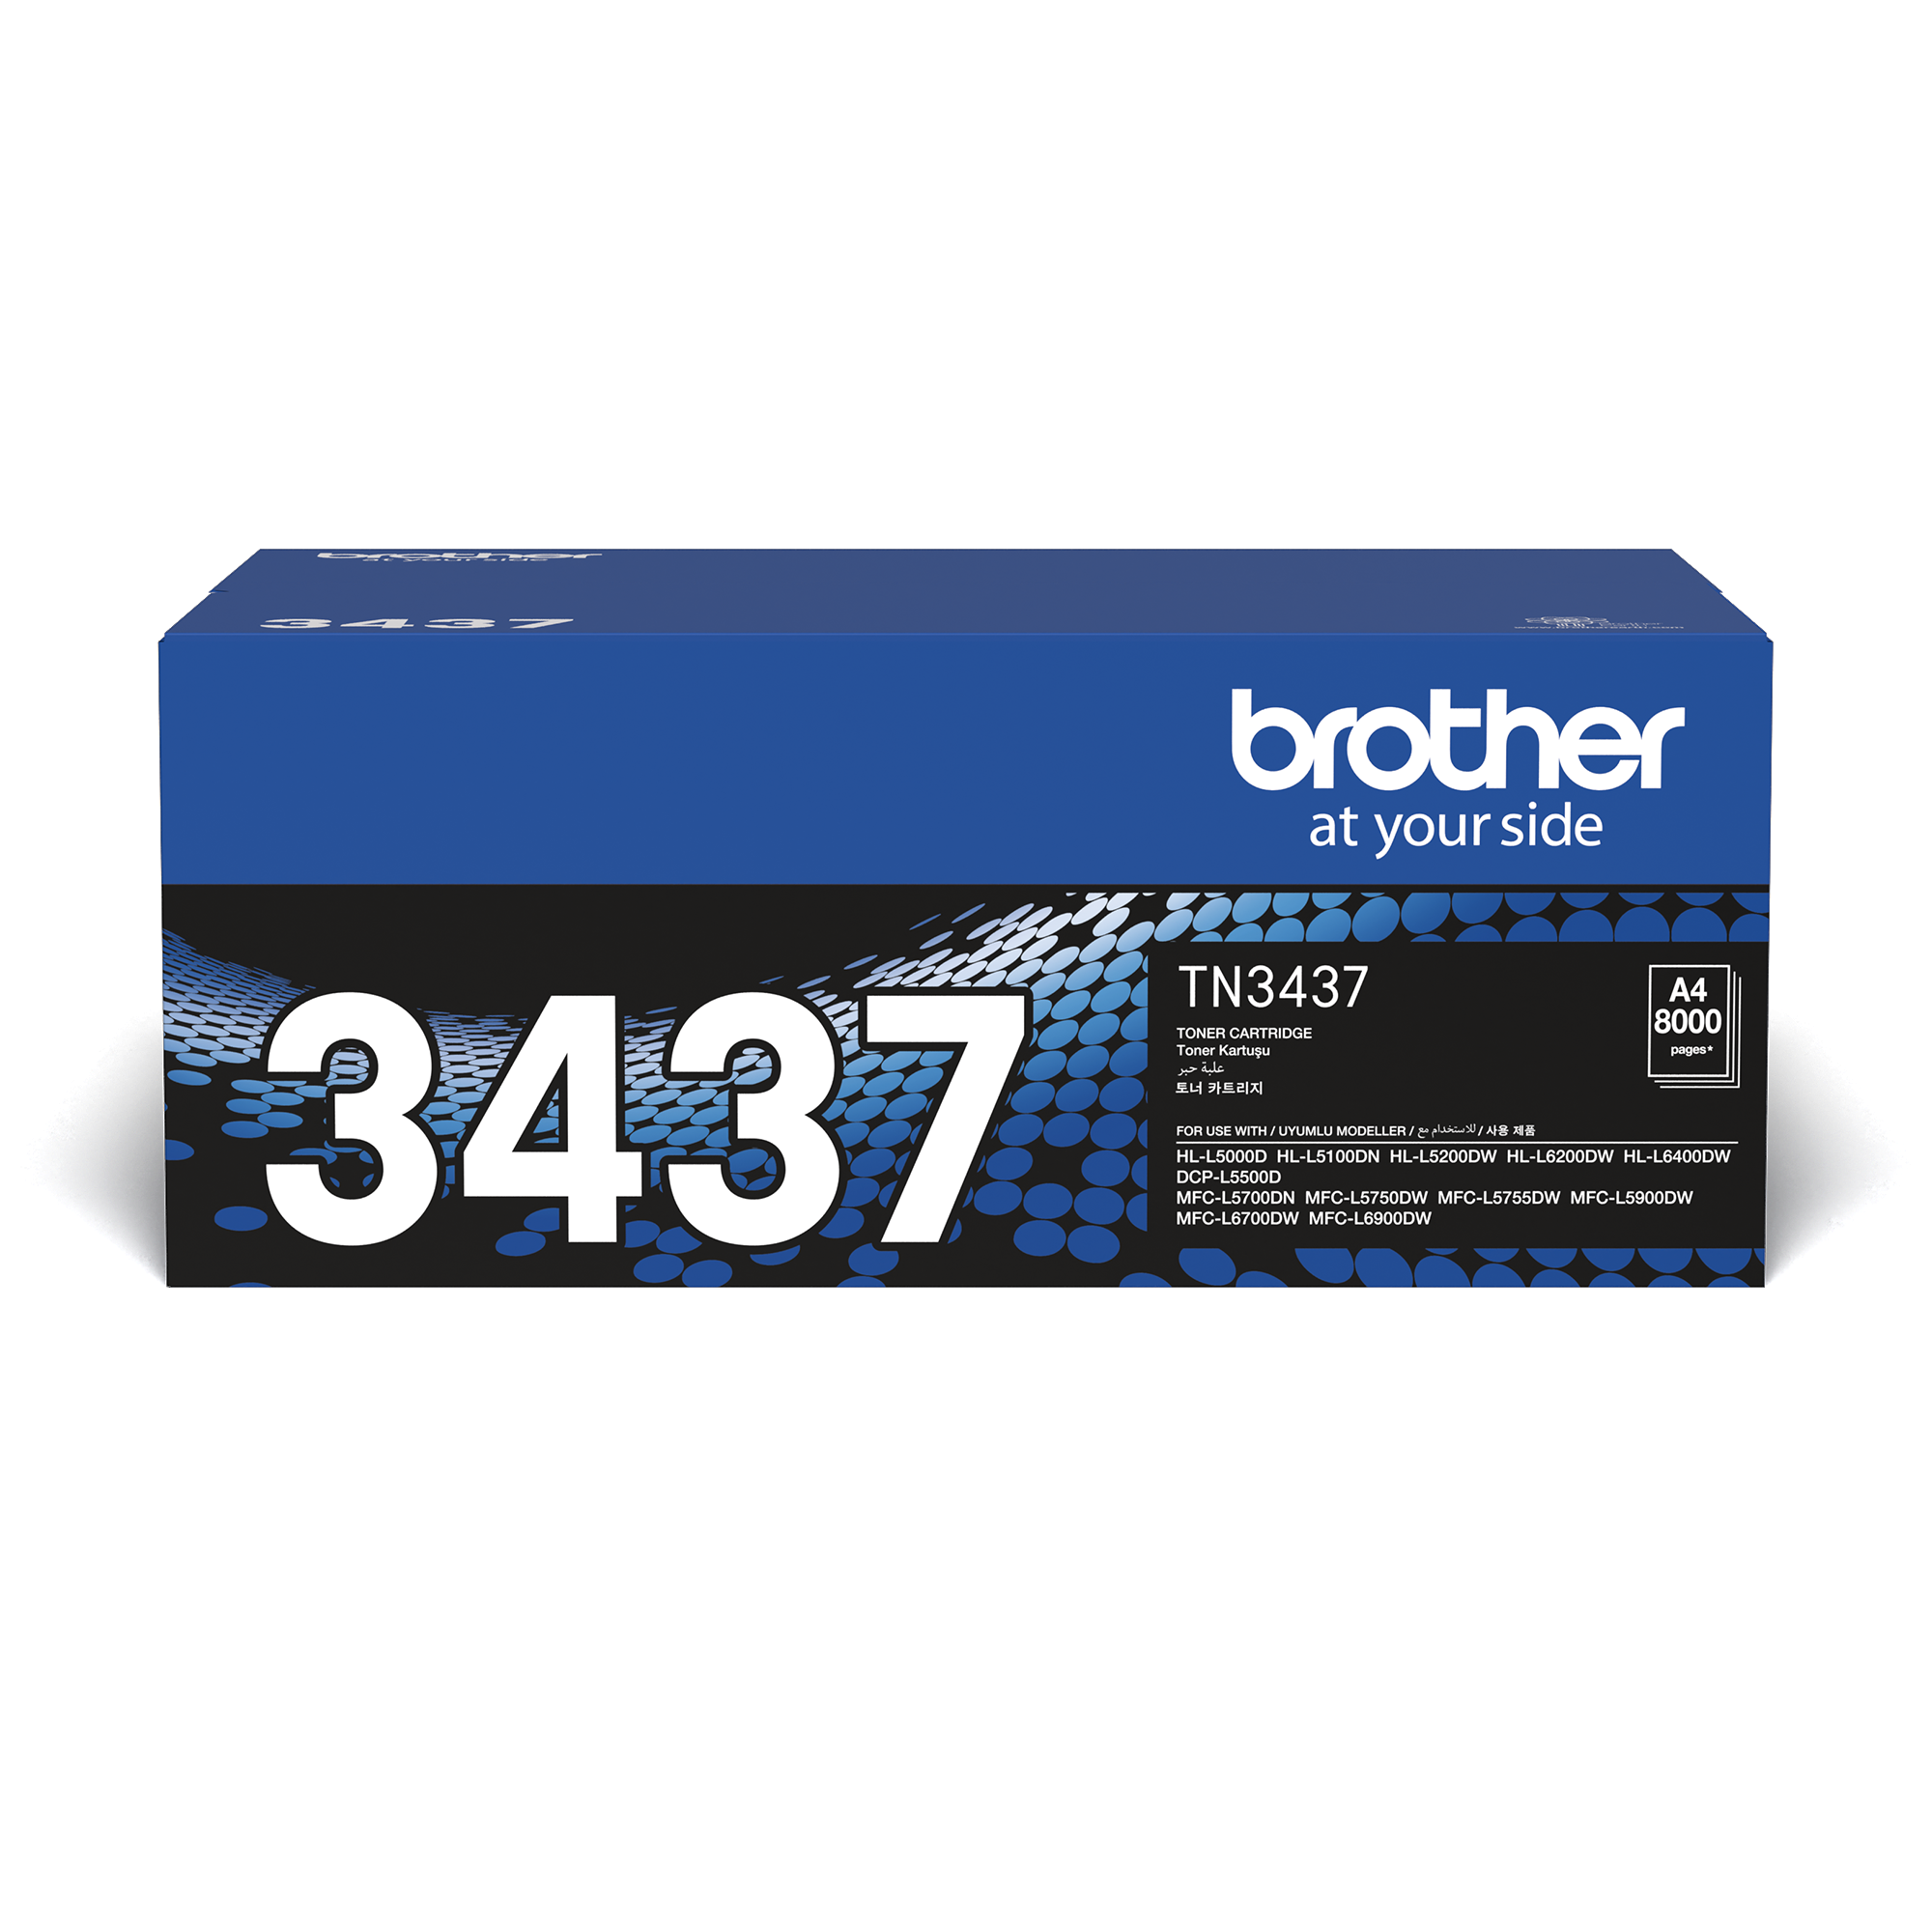 Brother TN3437 TN-3437 Black Toner Cartridge (8000 Pages)